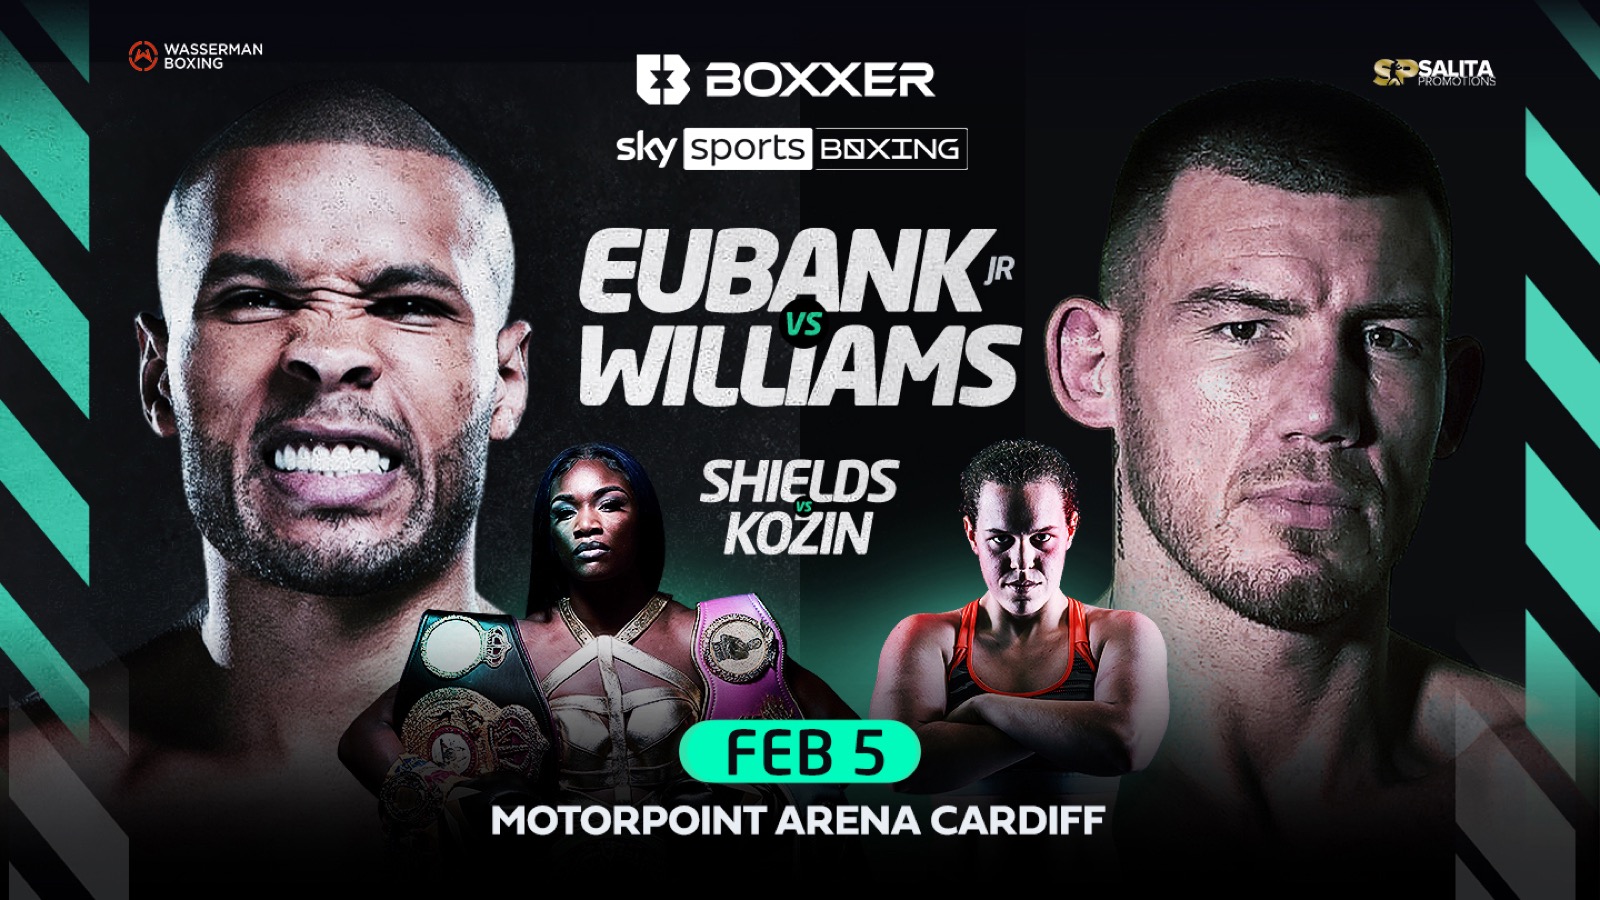 Image: Eubank Jr Vs Williams Moves To February 5 At Motorpoint Arena Cardiff